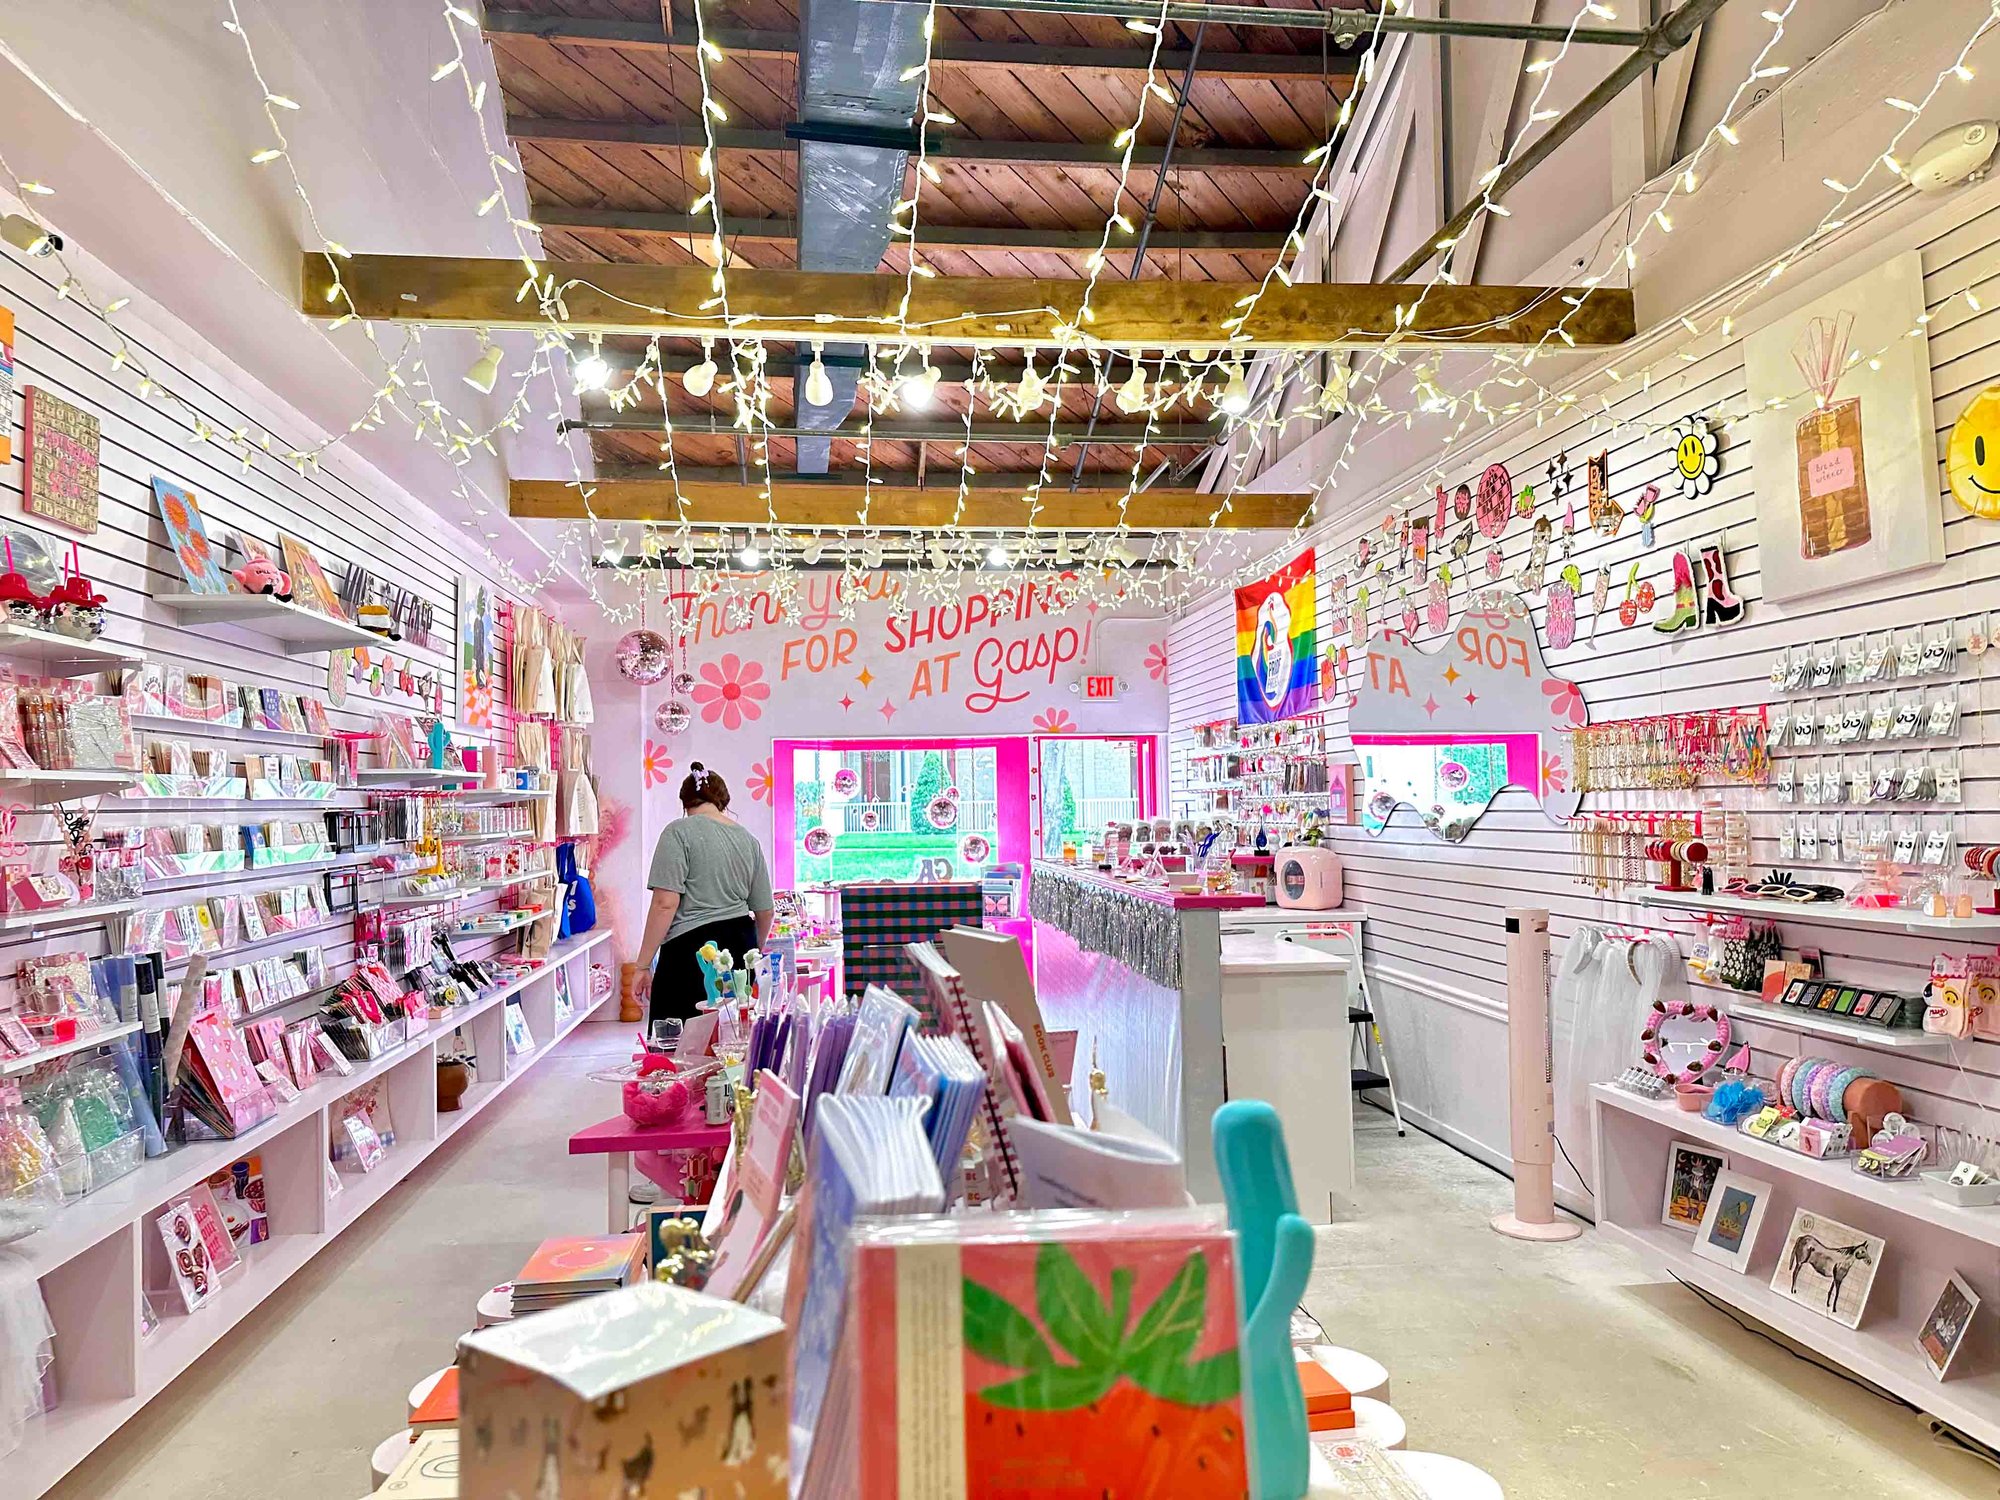 inside of building with white walls and shelves with various brightly colored items